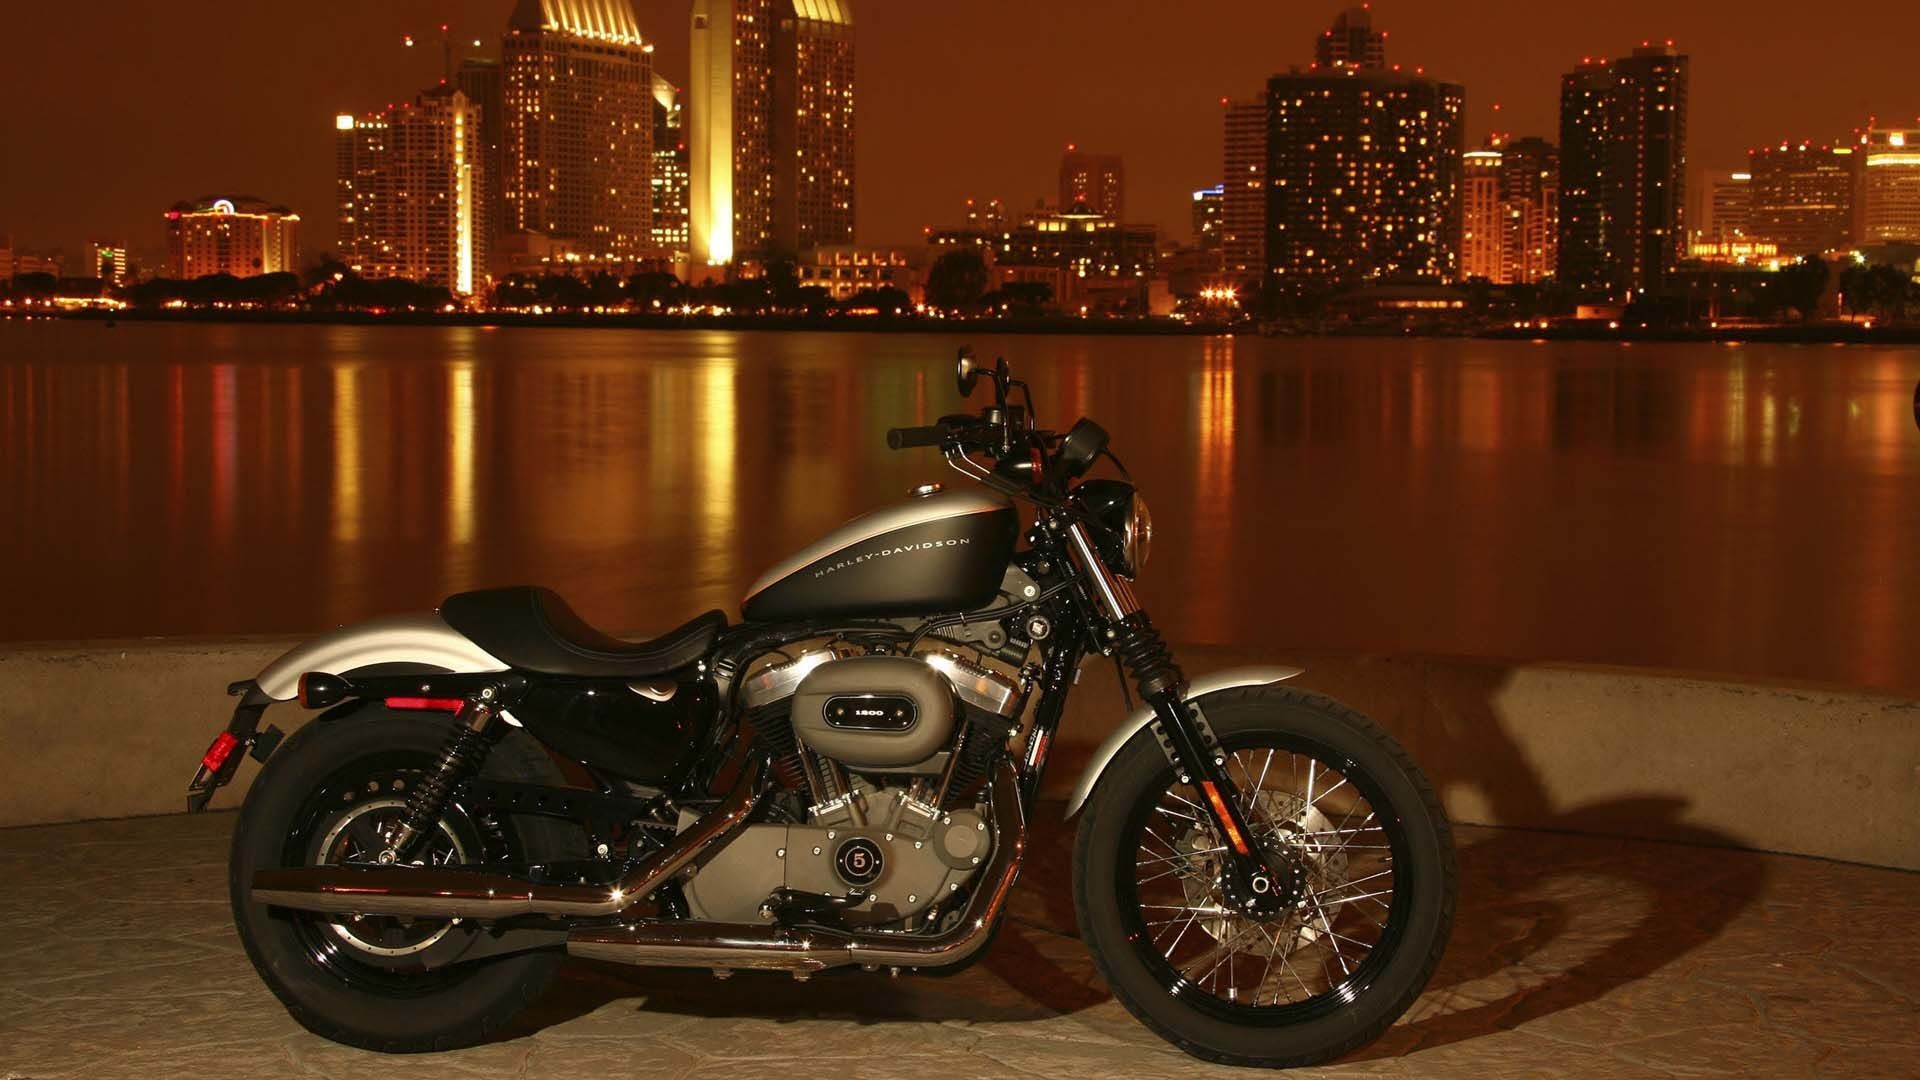 Harley Davidson Sportster Xl1200n With Romantic And Vintage Look Hd Harley Davidson Wallpaper 1920x1080